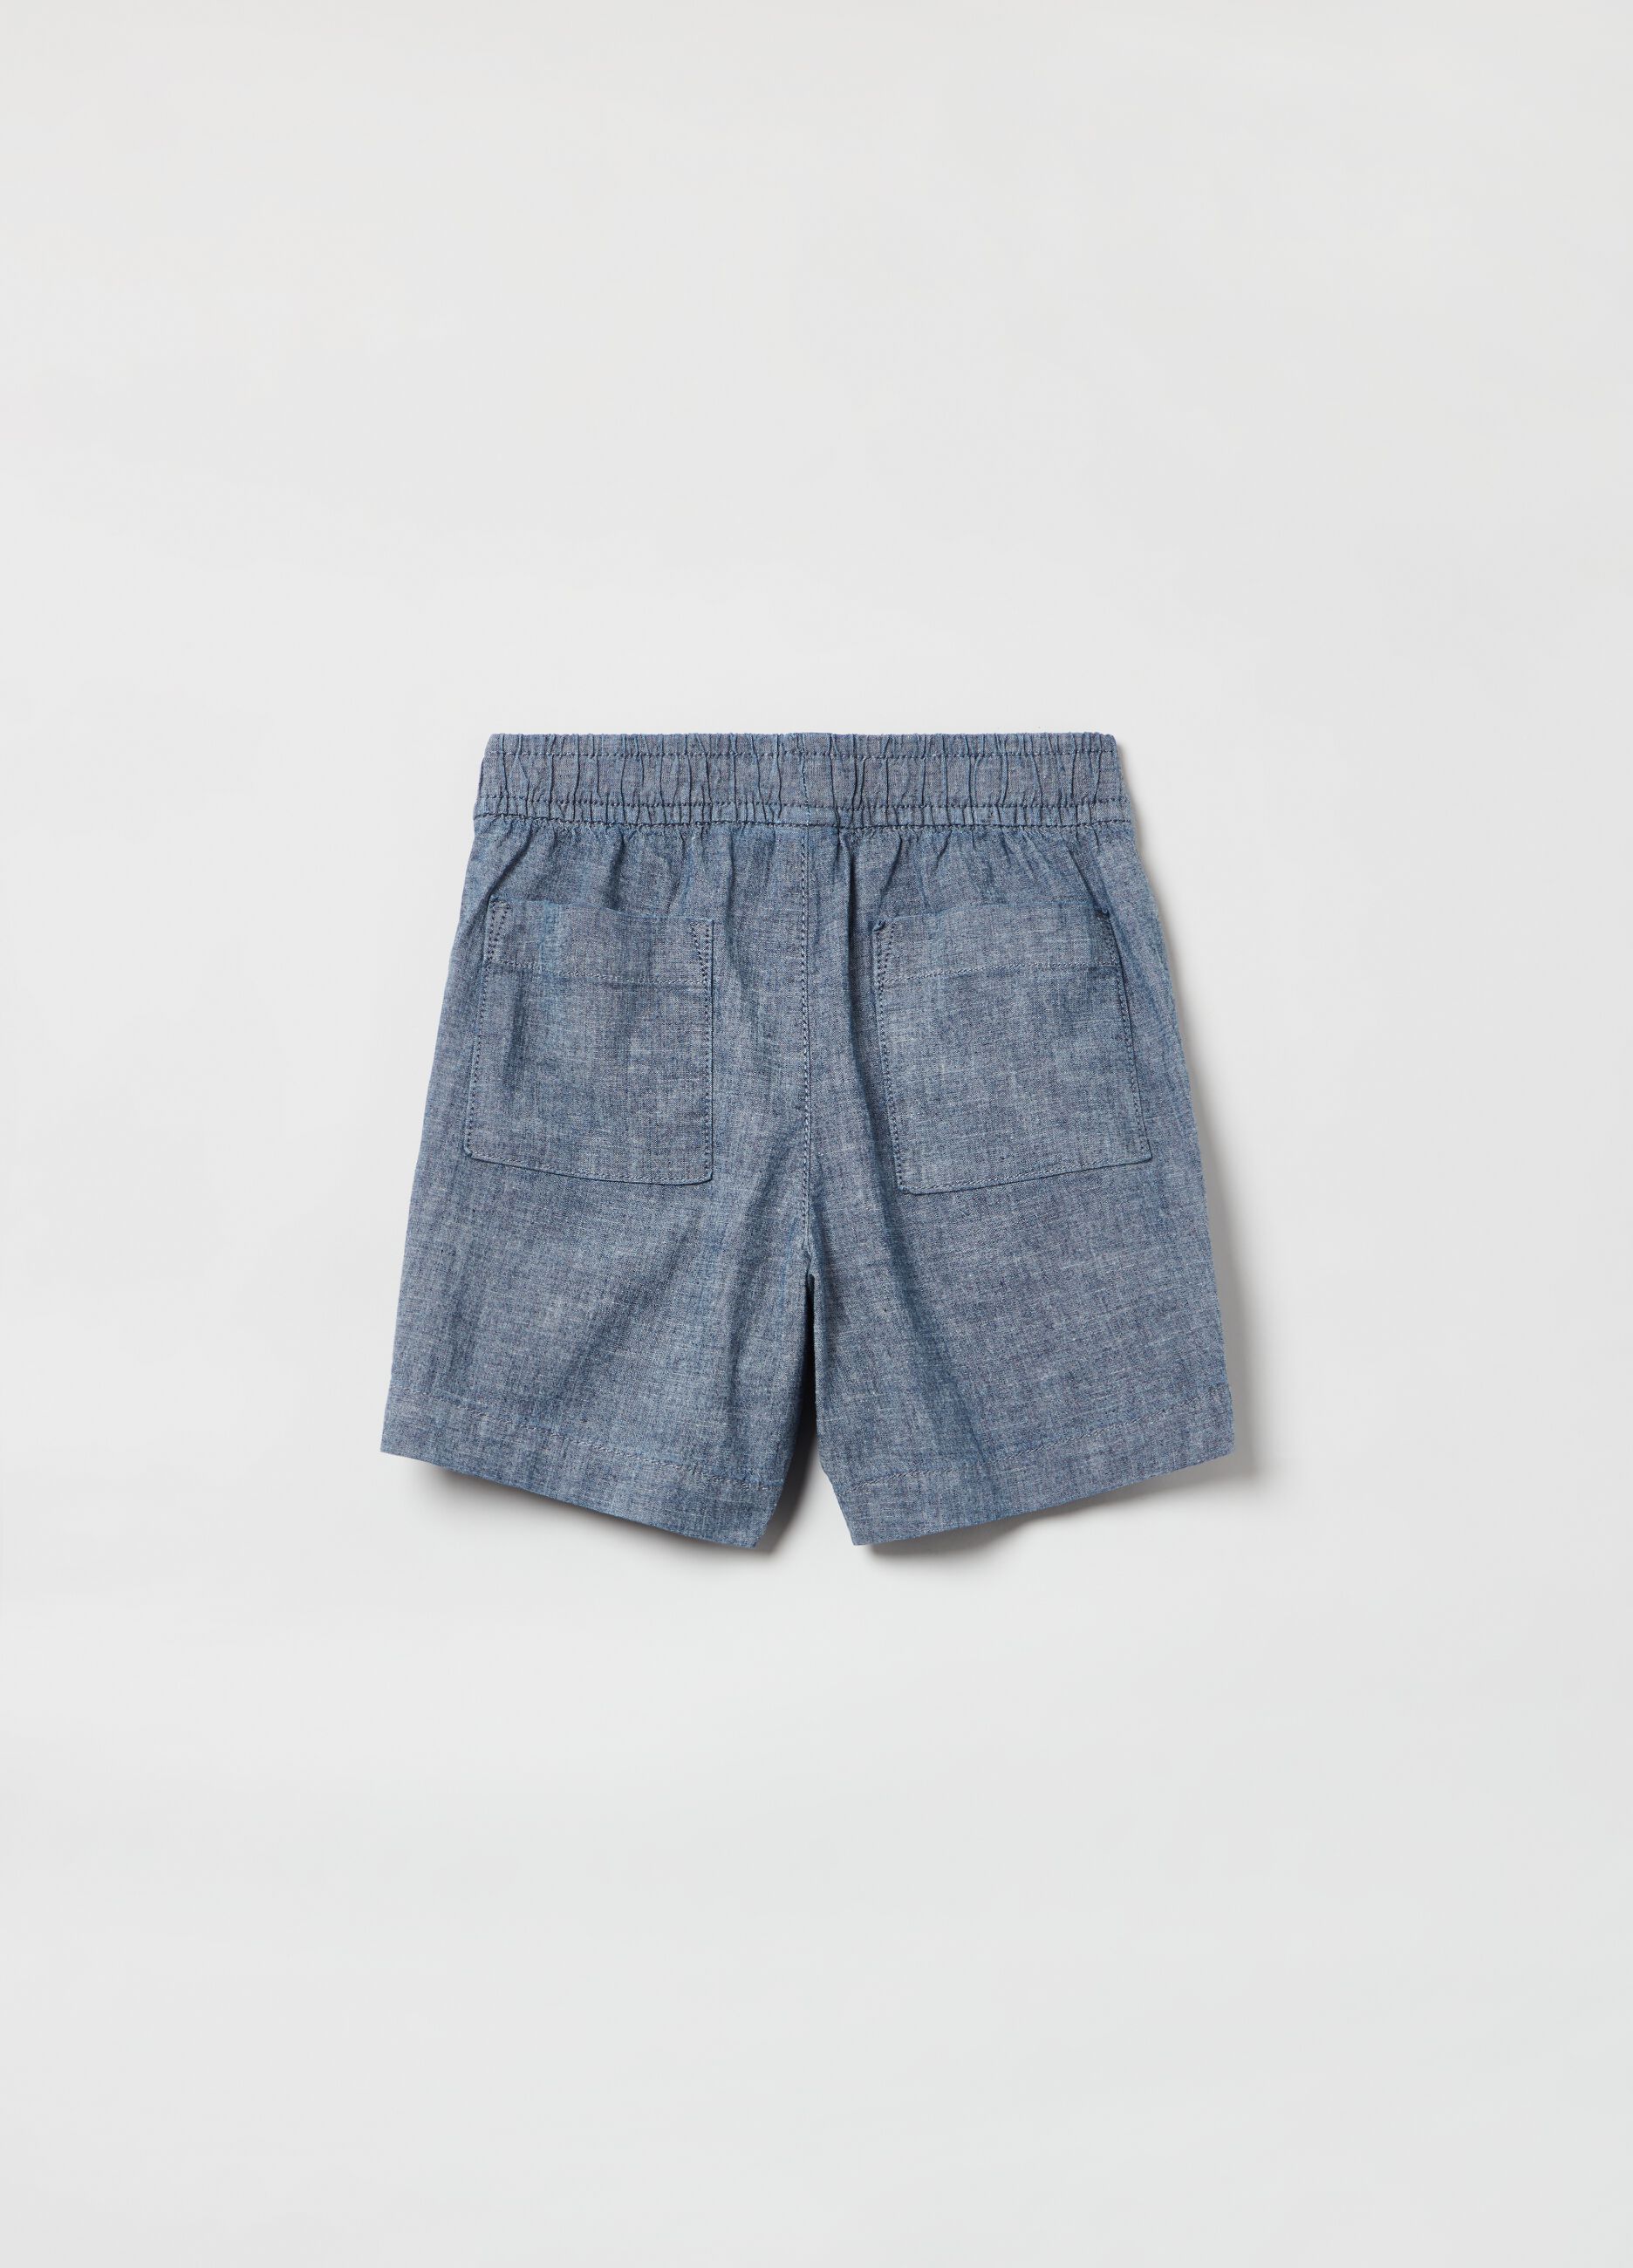 Woven shorts with drawstring